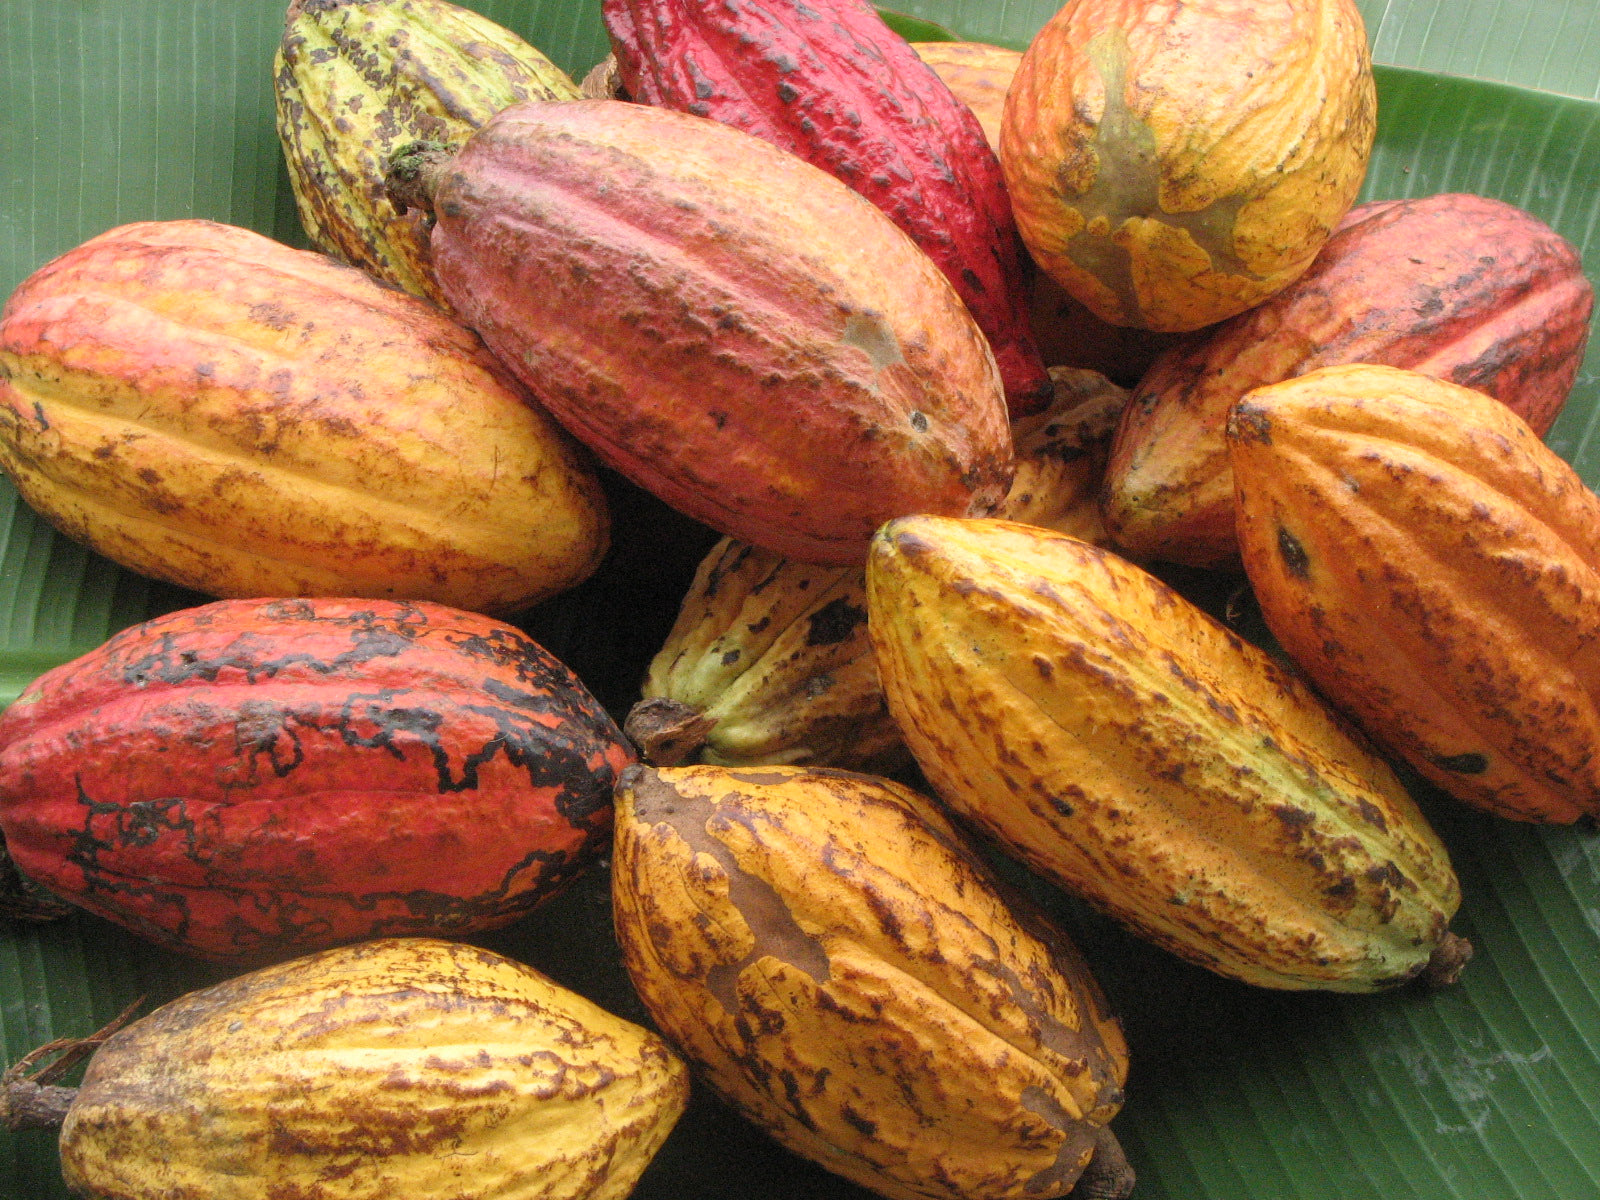 Ceremonial Cacao Is About More than Just Genetics